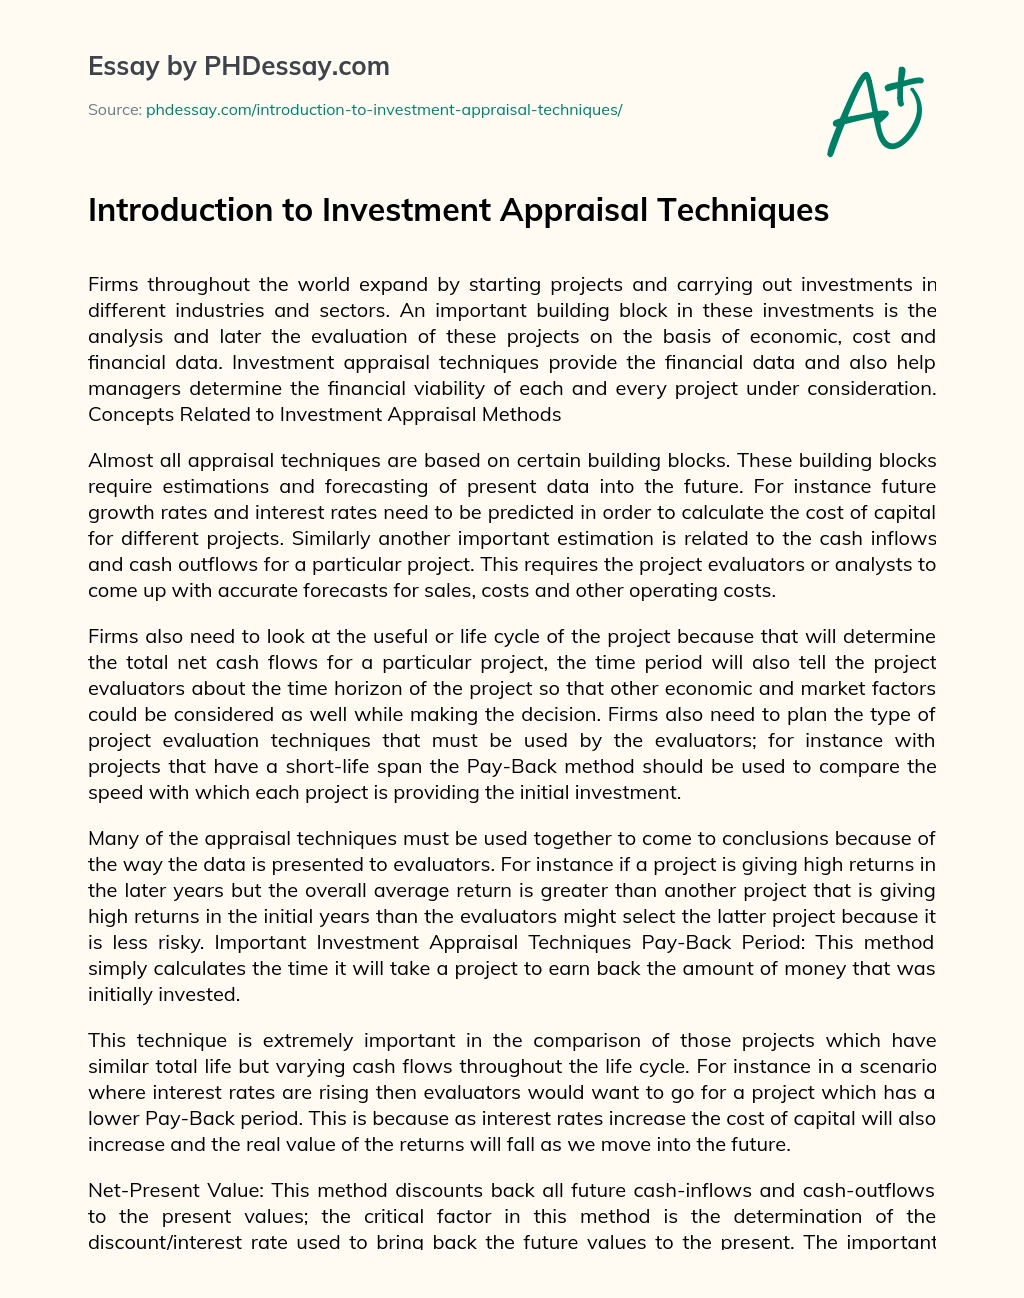 Introduction to Investment Appraisal Techniques essay